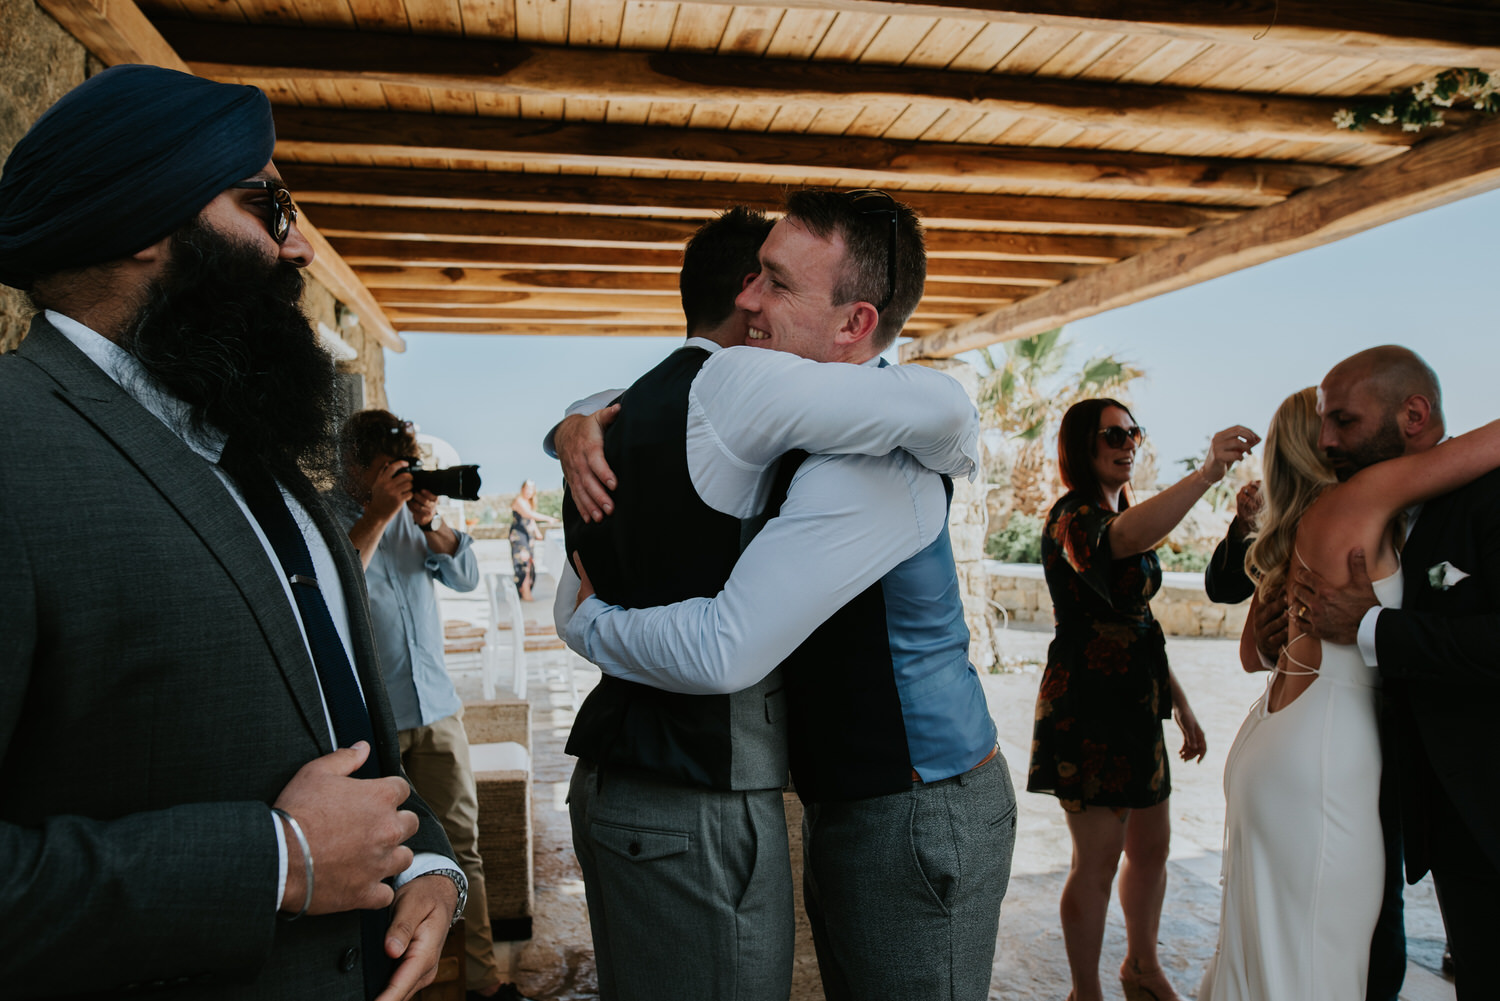 Moment bride and groom were both hugging friends receiving congratulations with Mykonos wedding photographer in the background.